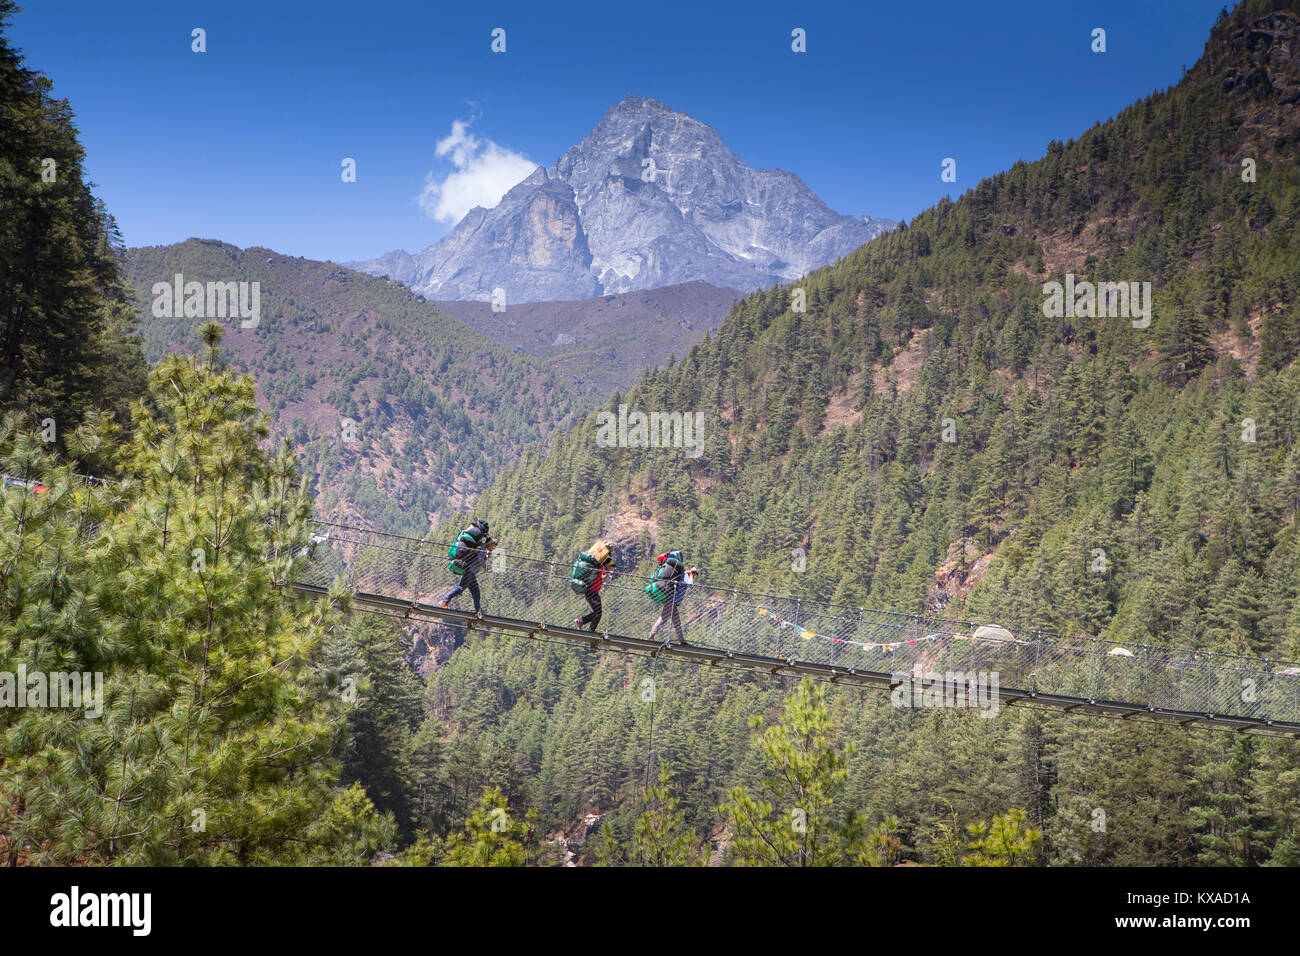 Three porters are crossing a Nepalese suspension bridge over a deep gorge on the way to Namche Bazar. Stock Photo